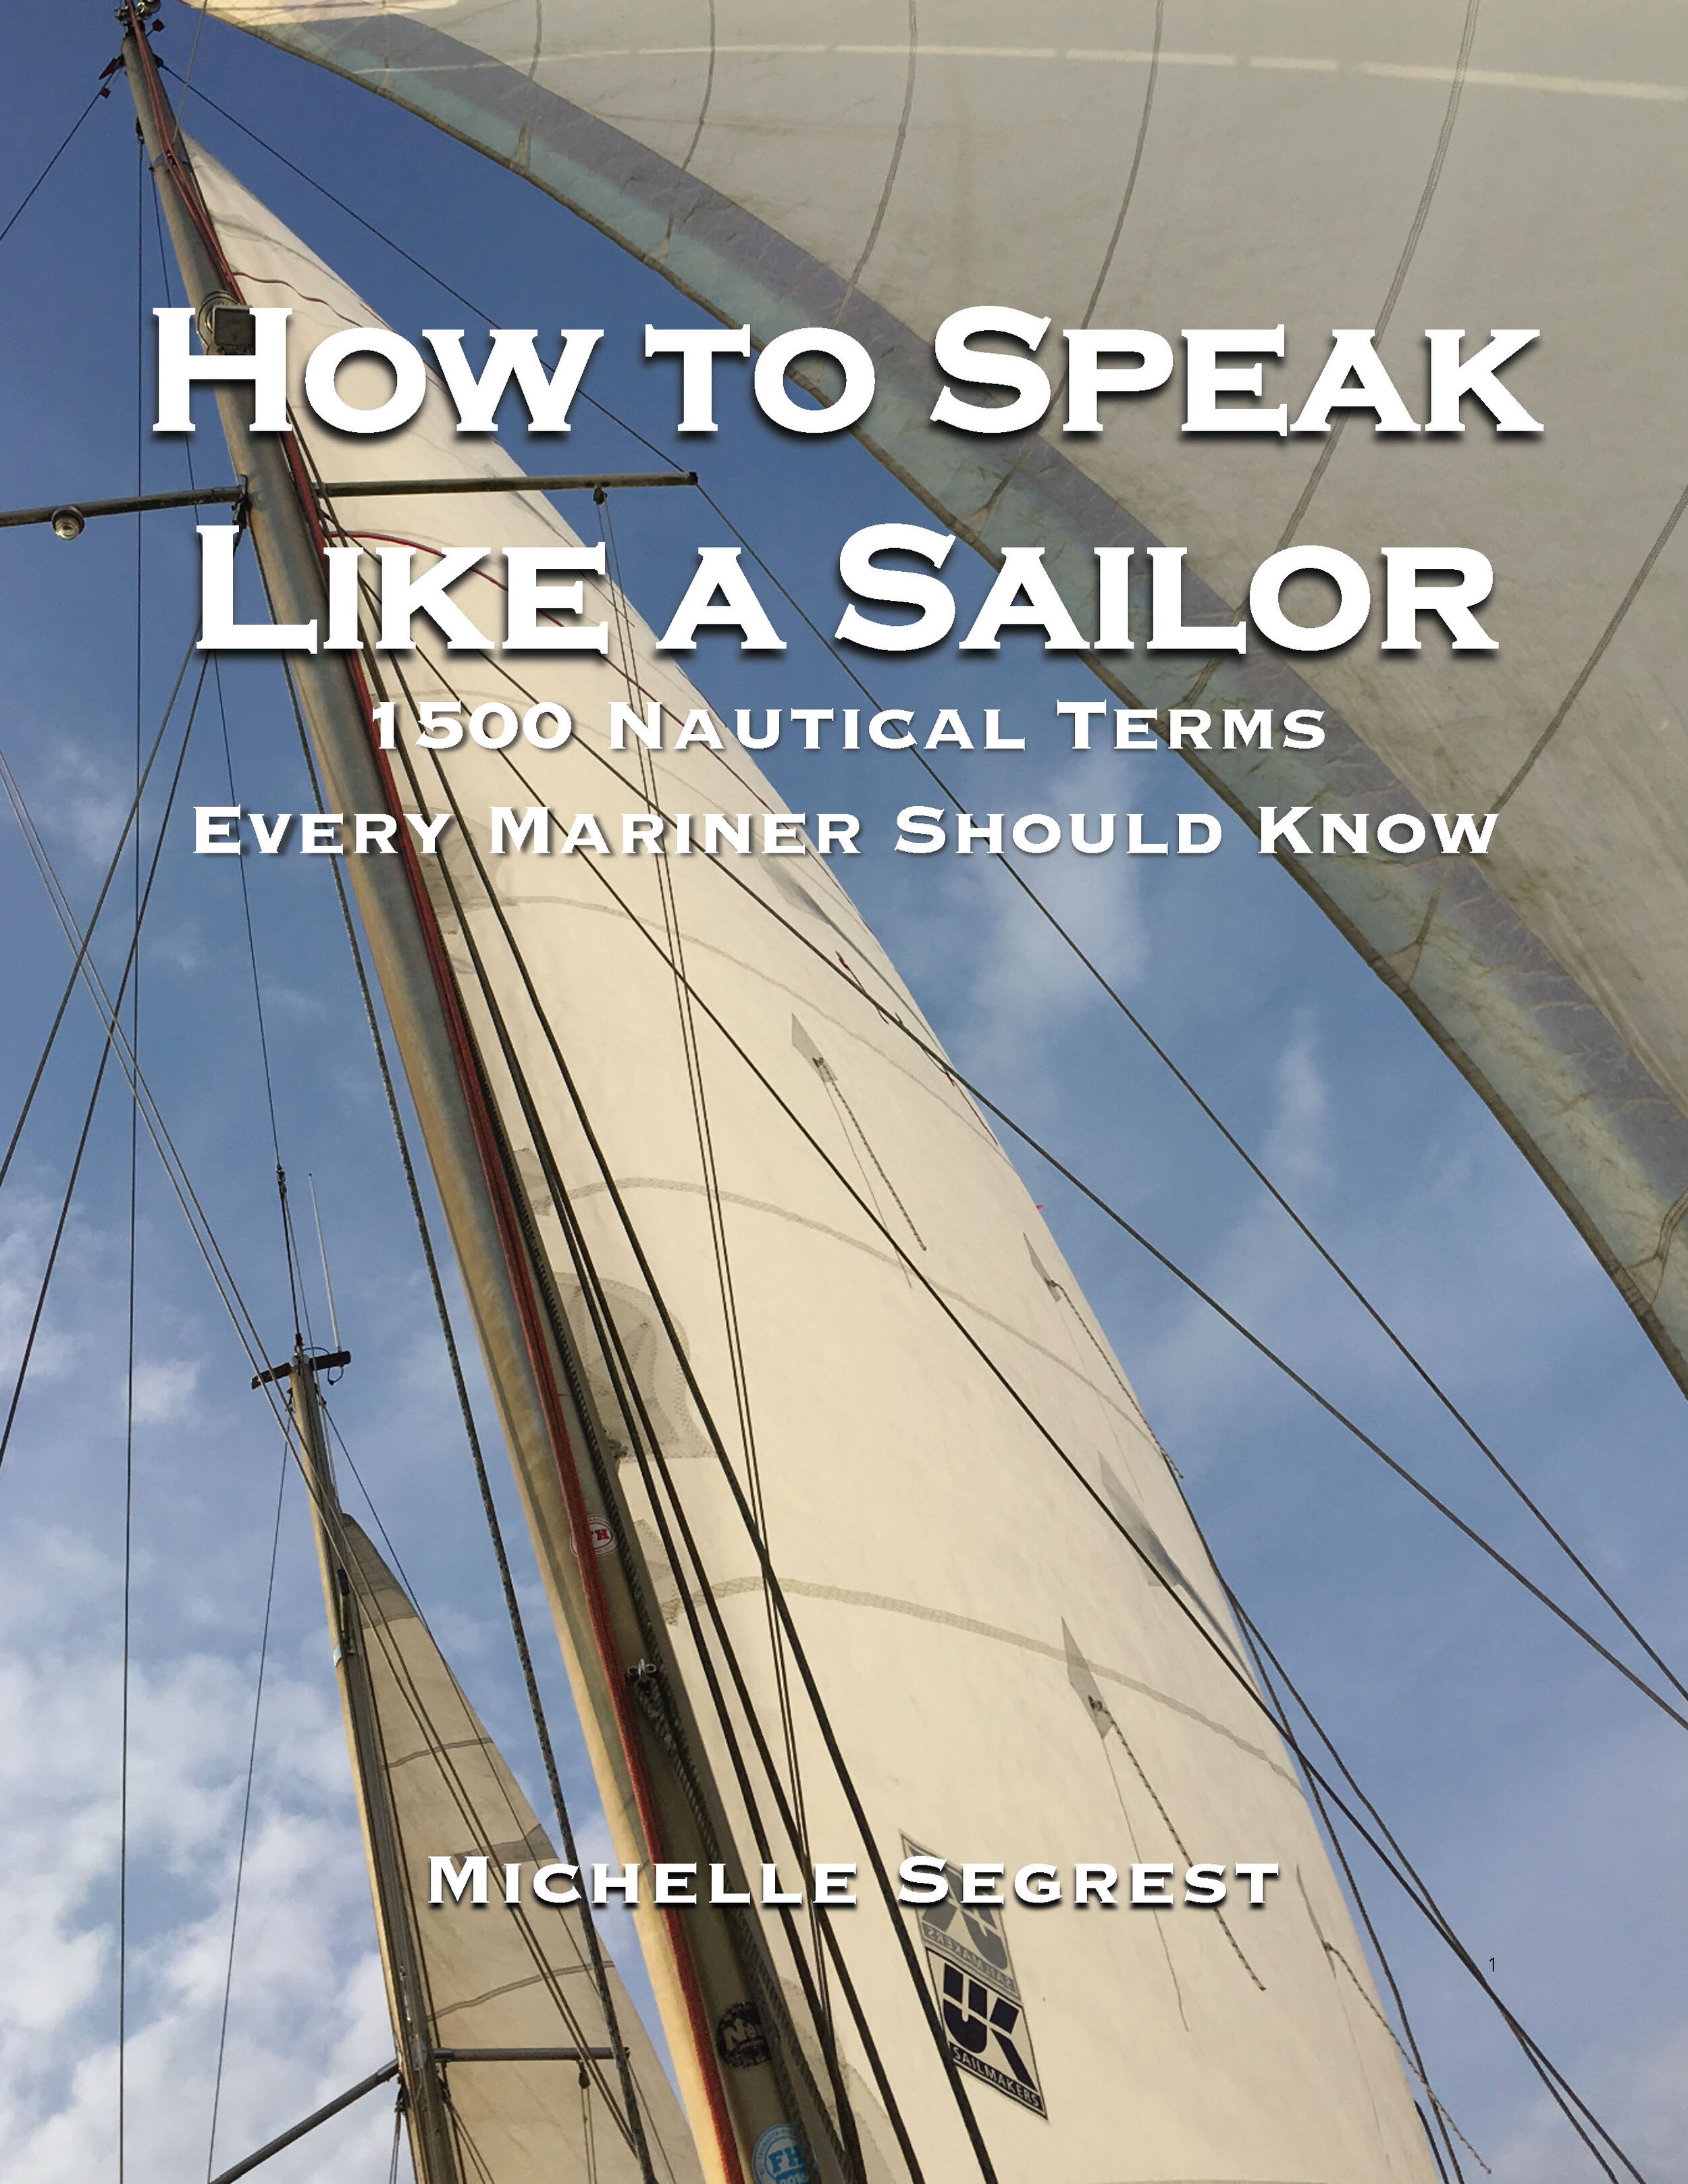 HOW TO SPEAK LIKE A SAILOR - 1500 Nautical Terms Every Mariner Should Know